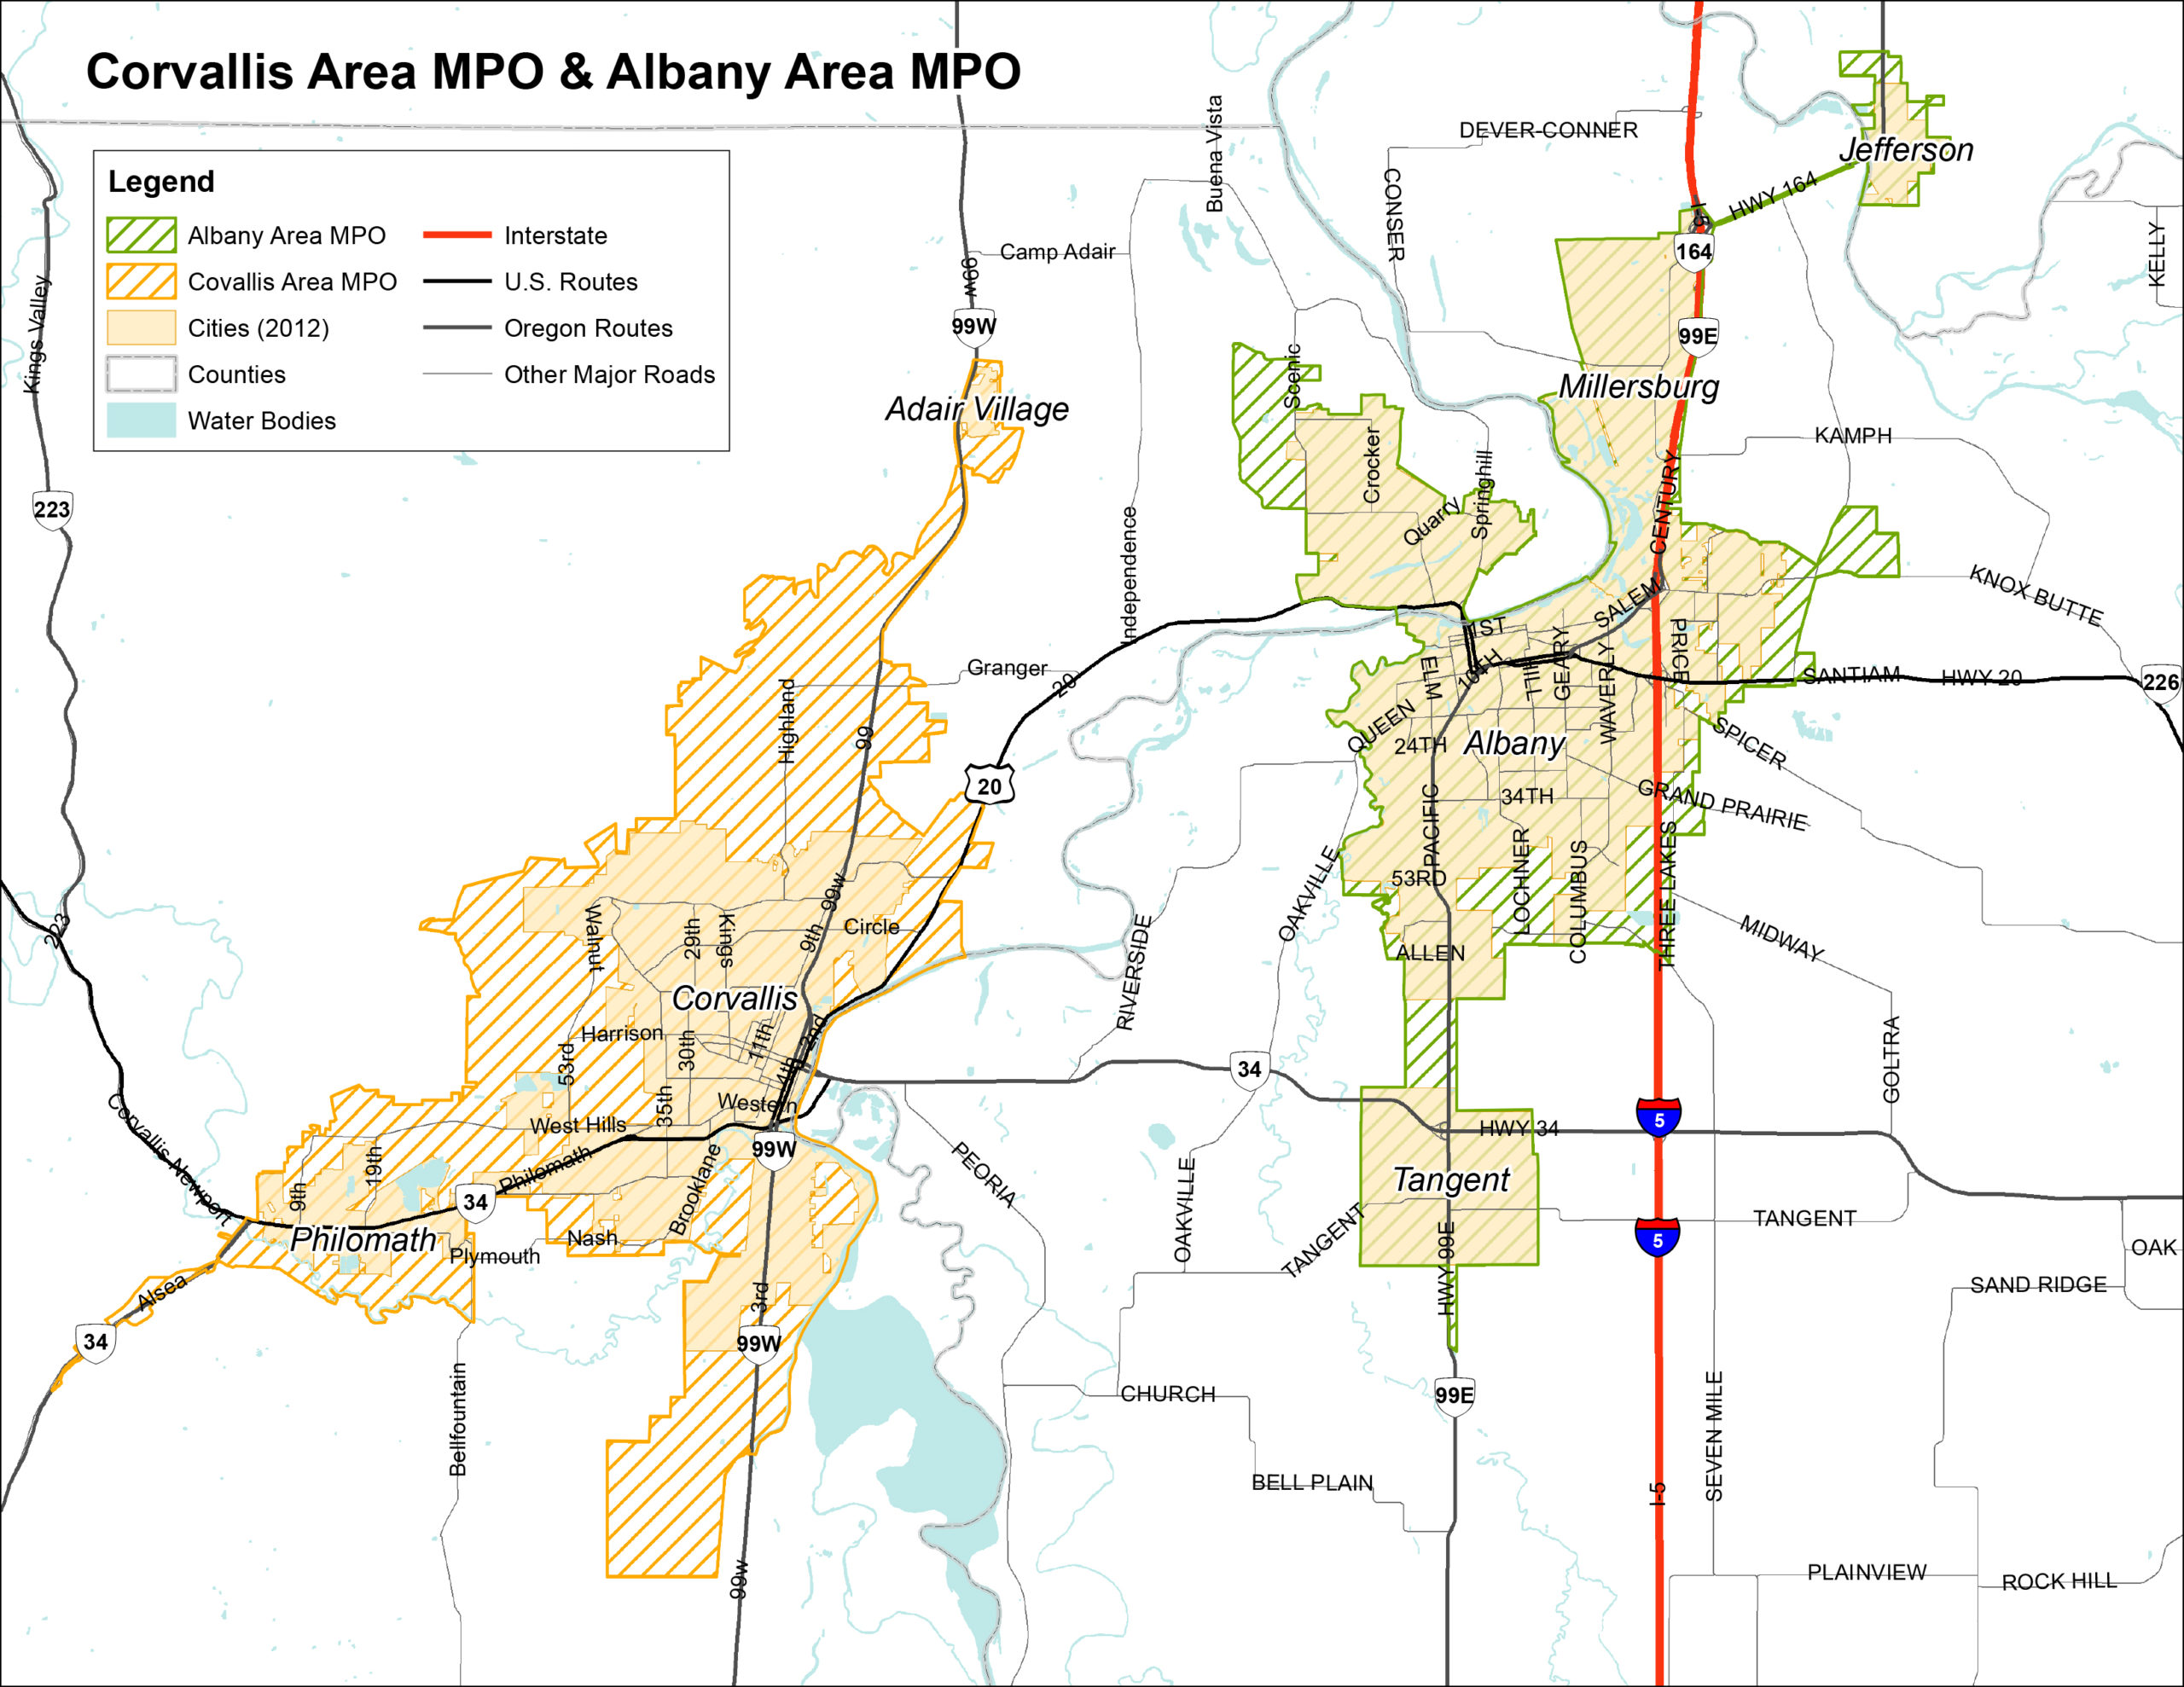 Corvallis And Albany Area MPOs Regional Map